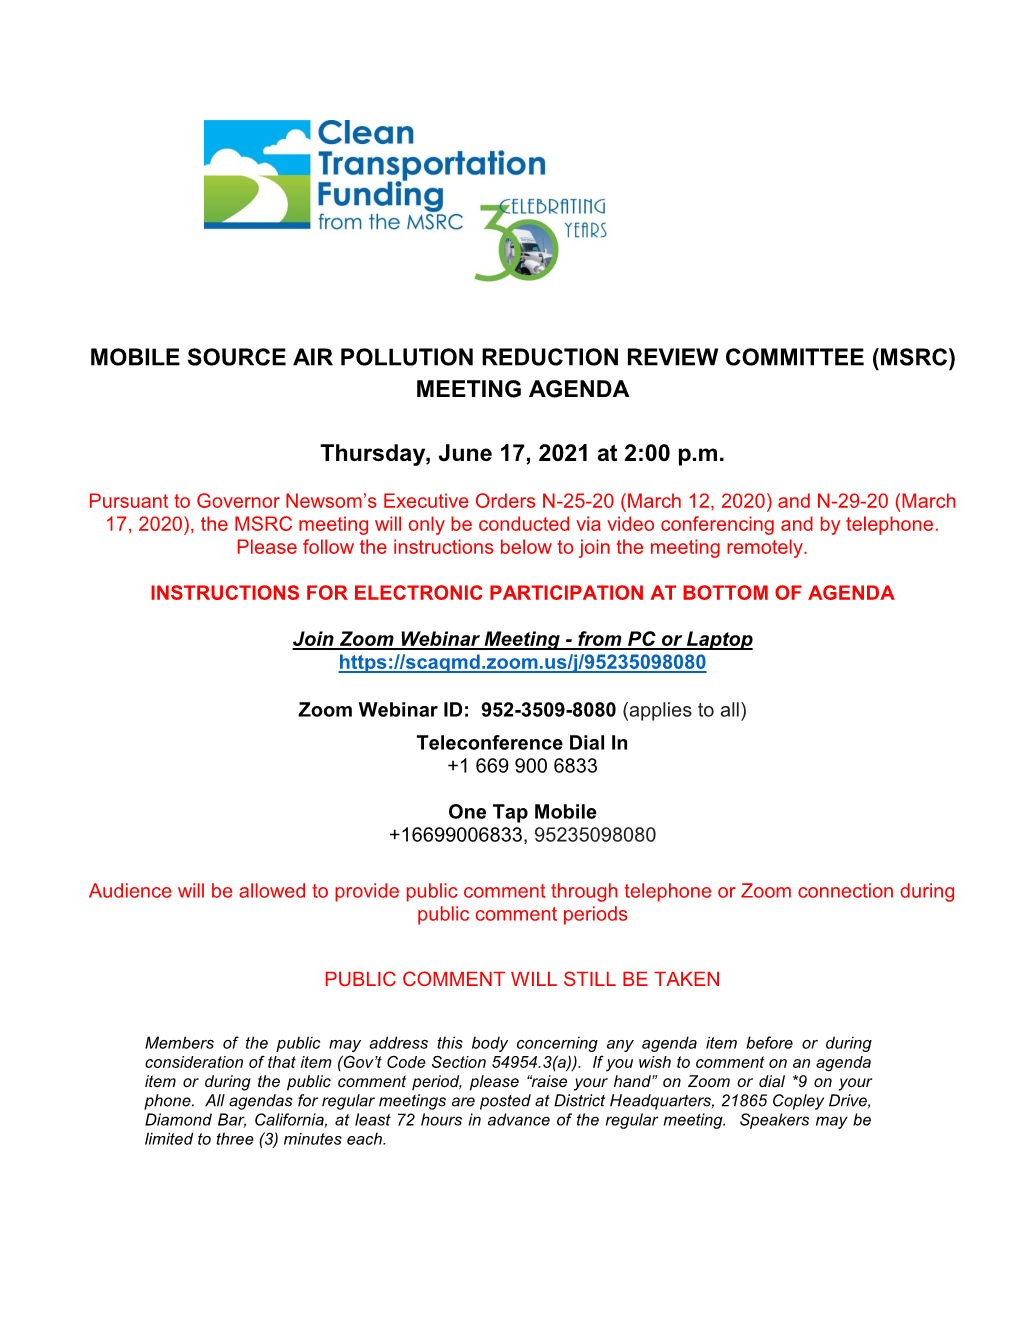 MOBILE SOURCE AIR POLLUTION REDUCTION REVIEW COMMITTEE (MSRC) MEETING AGENDA Thursday, June 17, 2021 at 2:00 P.M